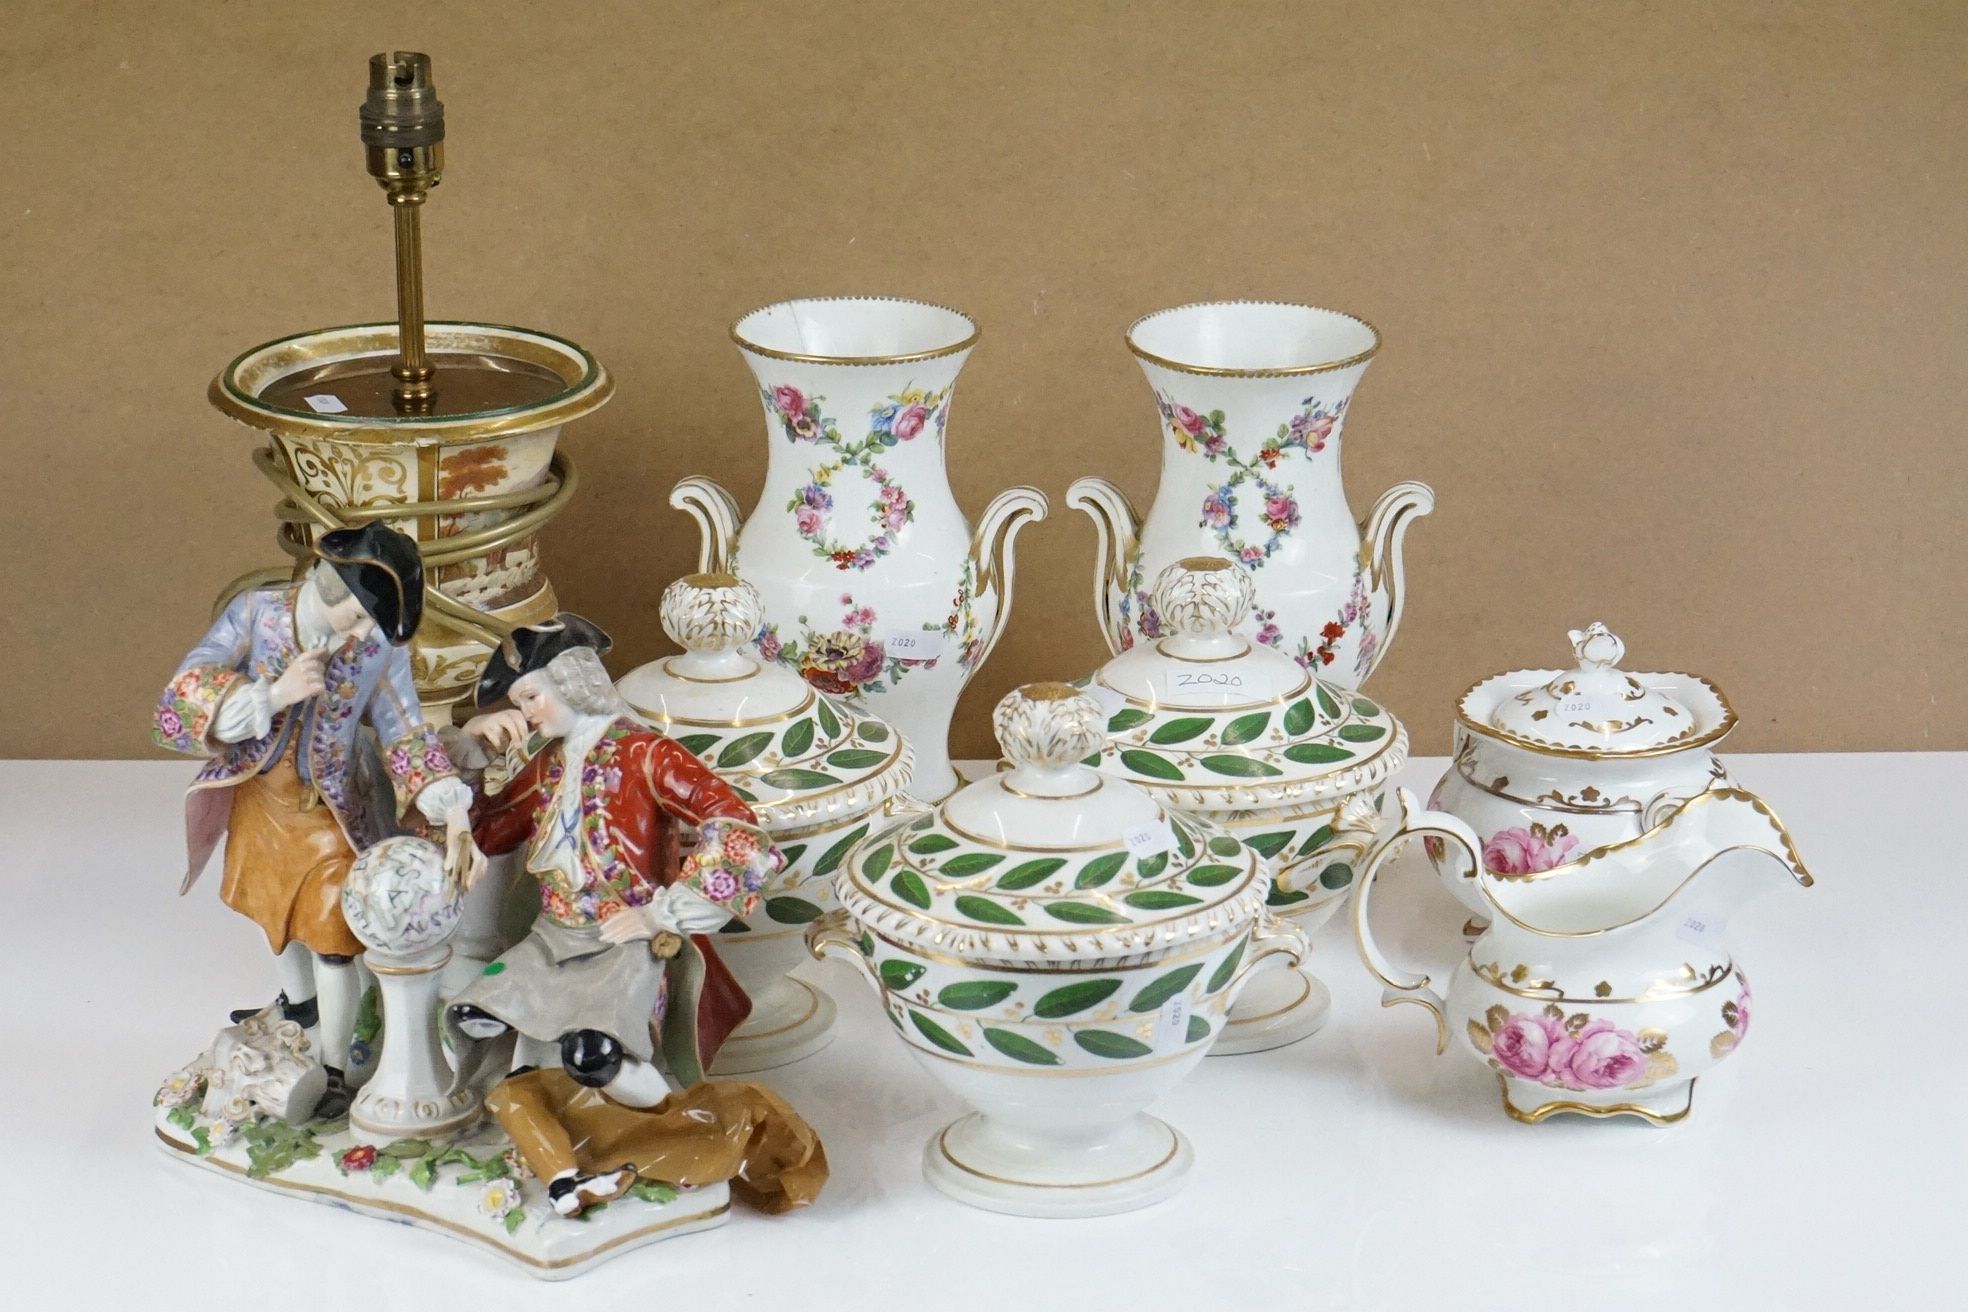 Set of Three 19th Century Bloor Derby twin-handled footed sauce tureens & covers with hand painted